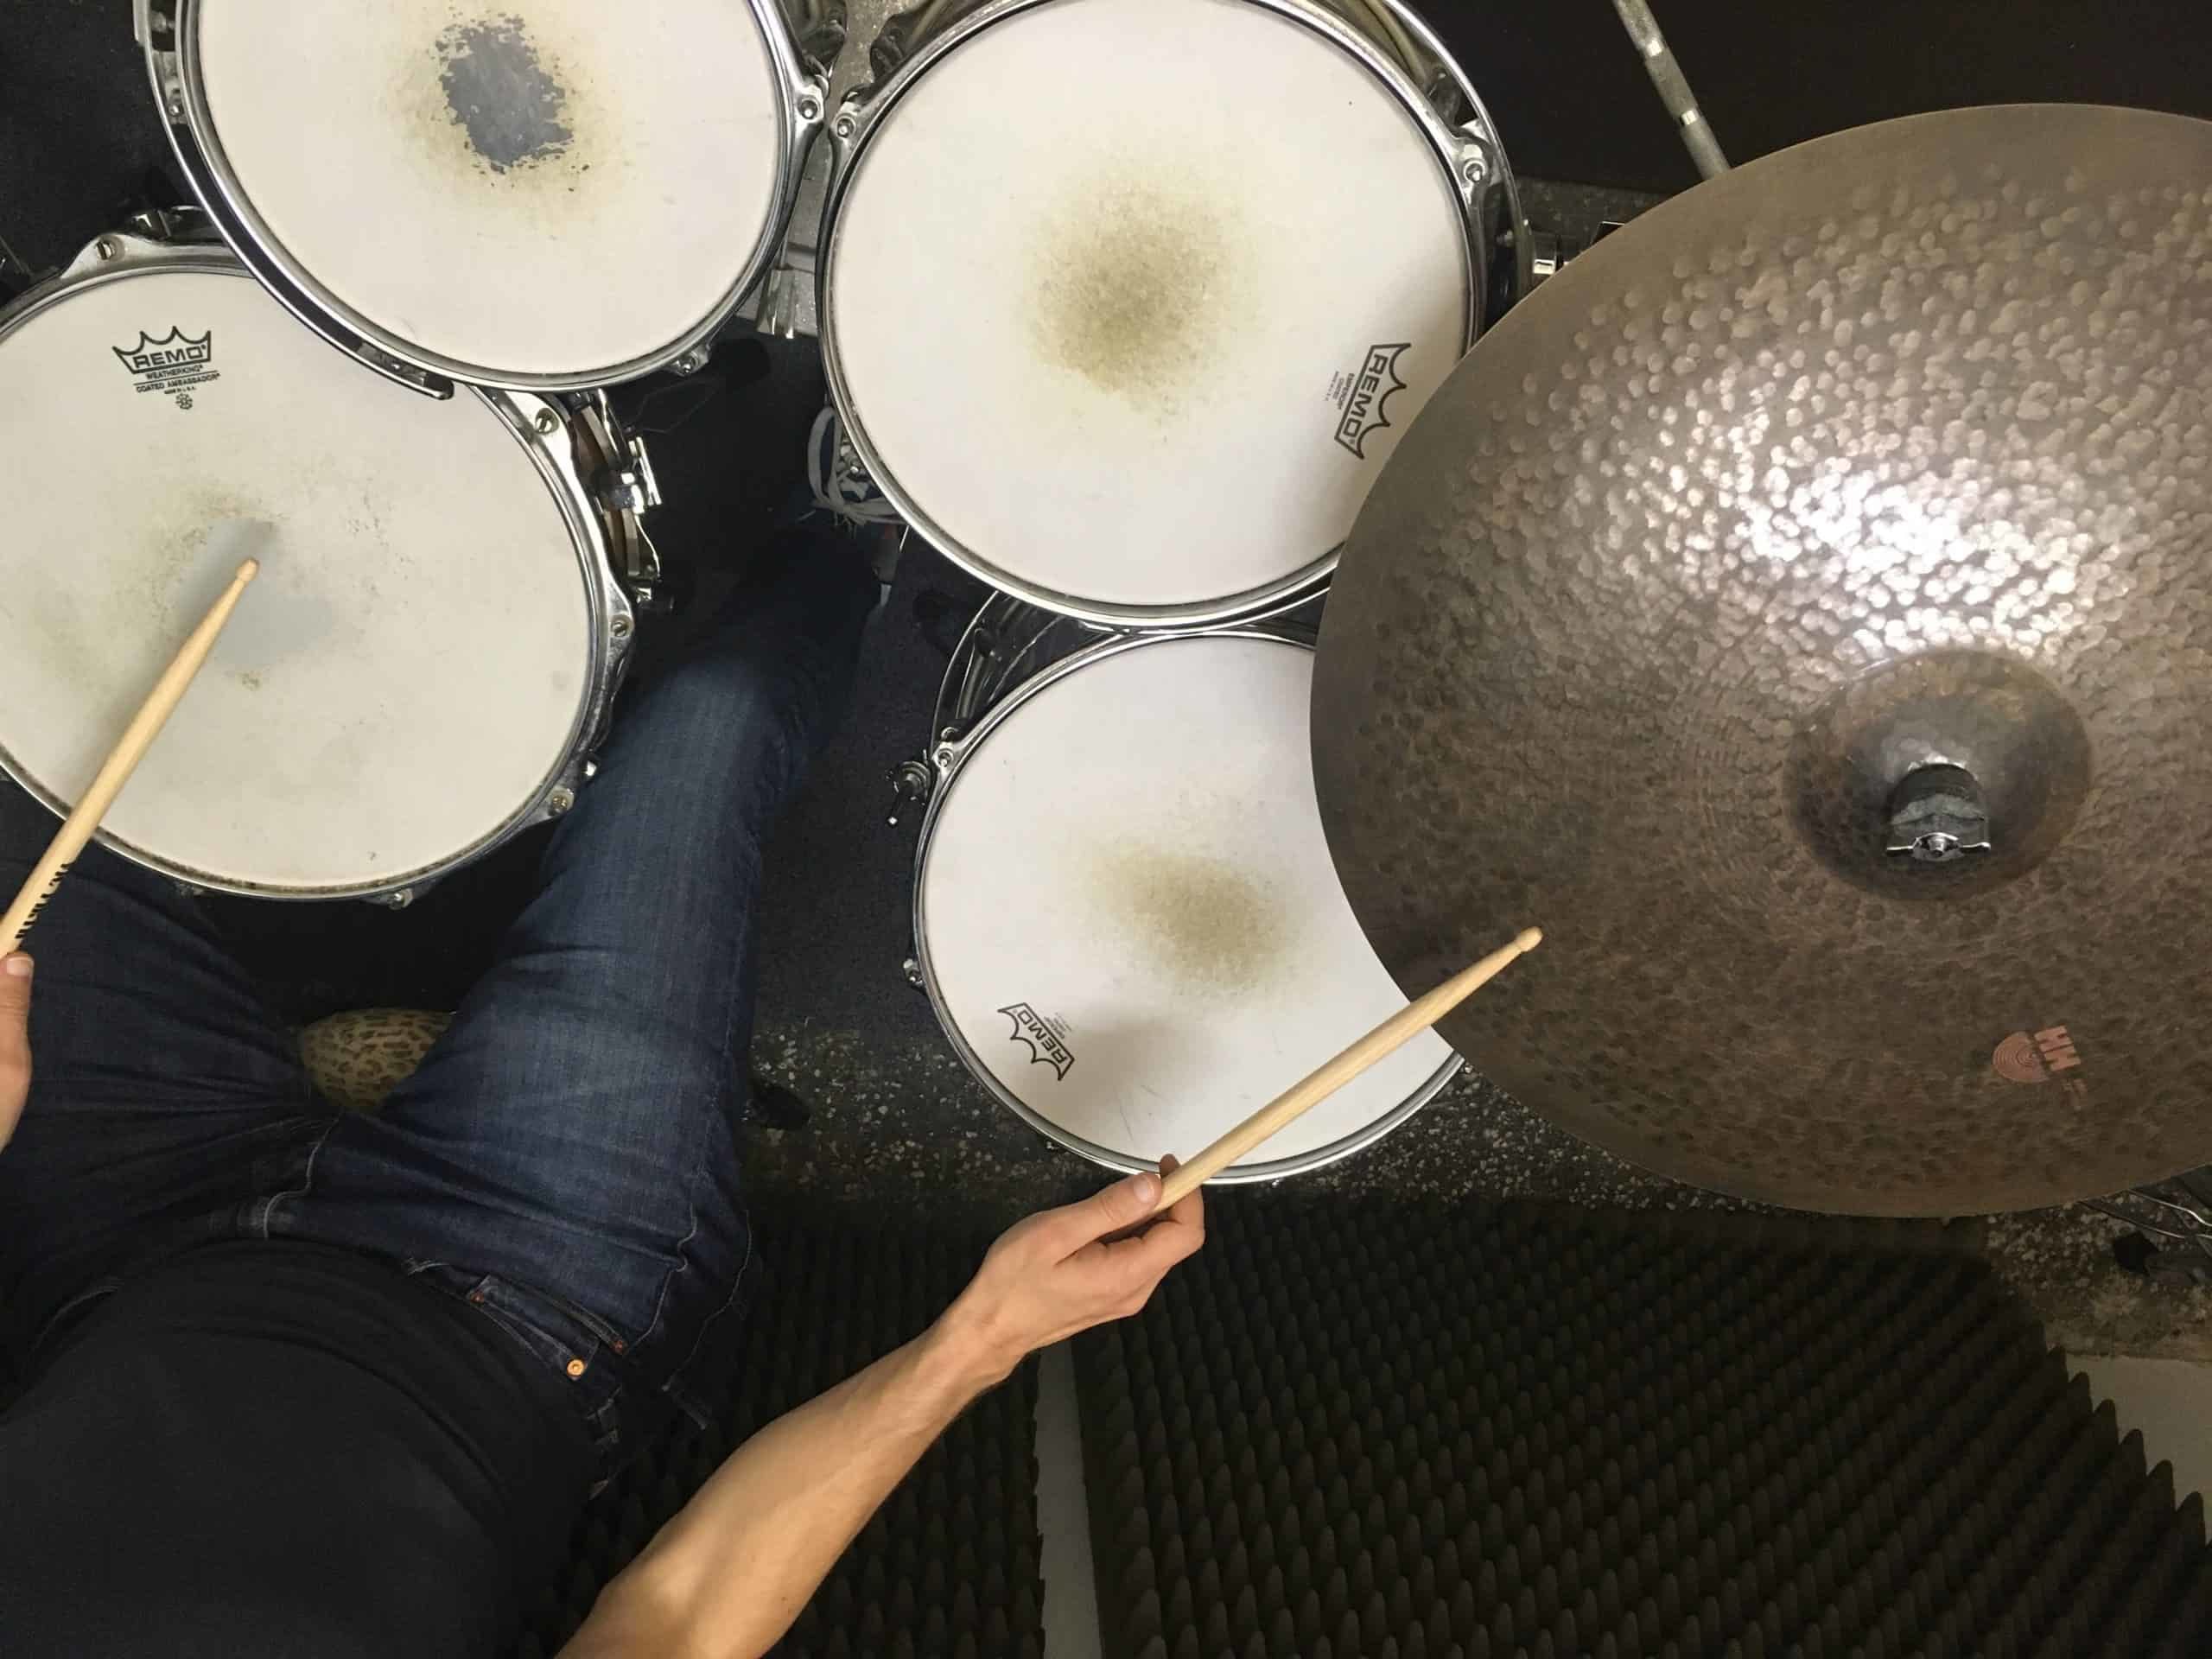 How to set up a drumset: Ride Cymbal